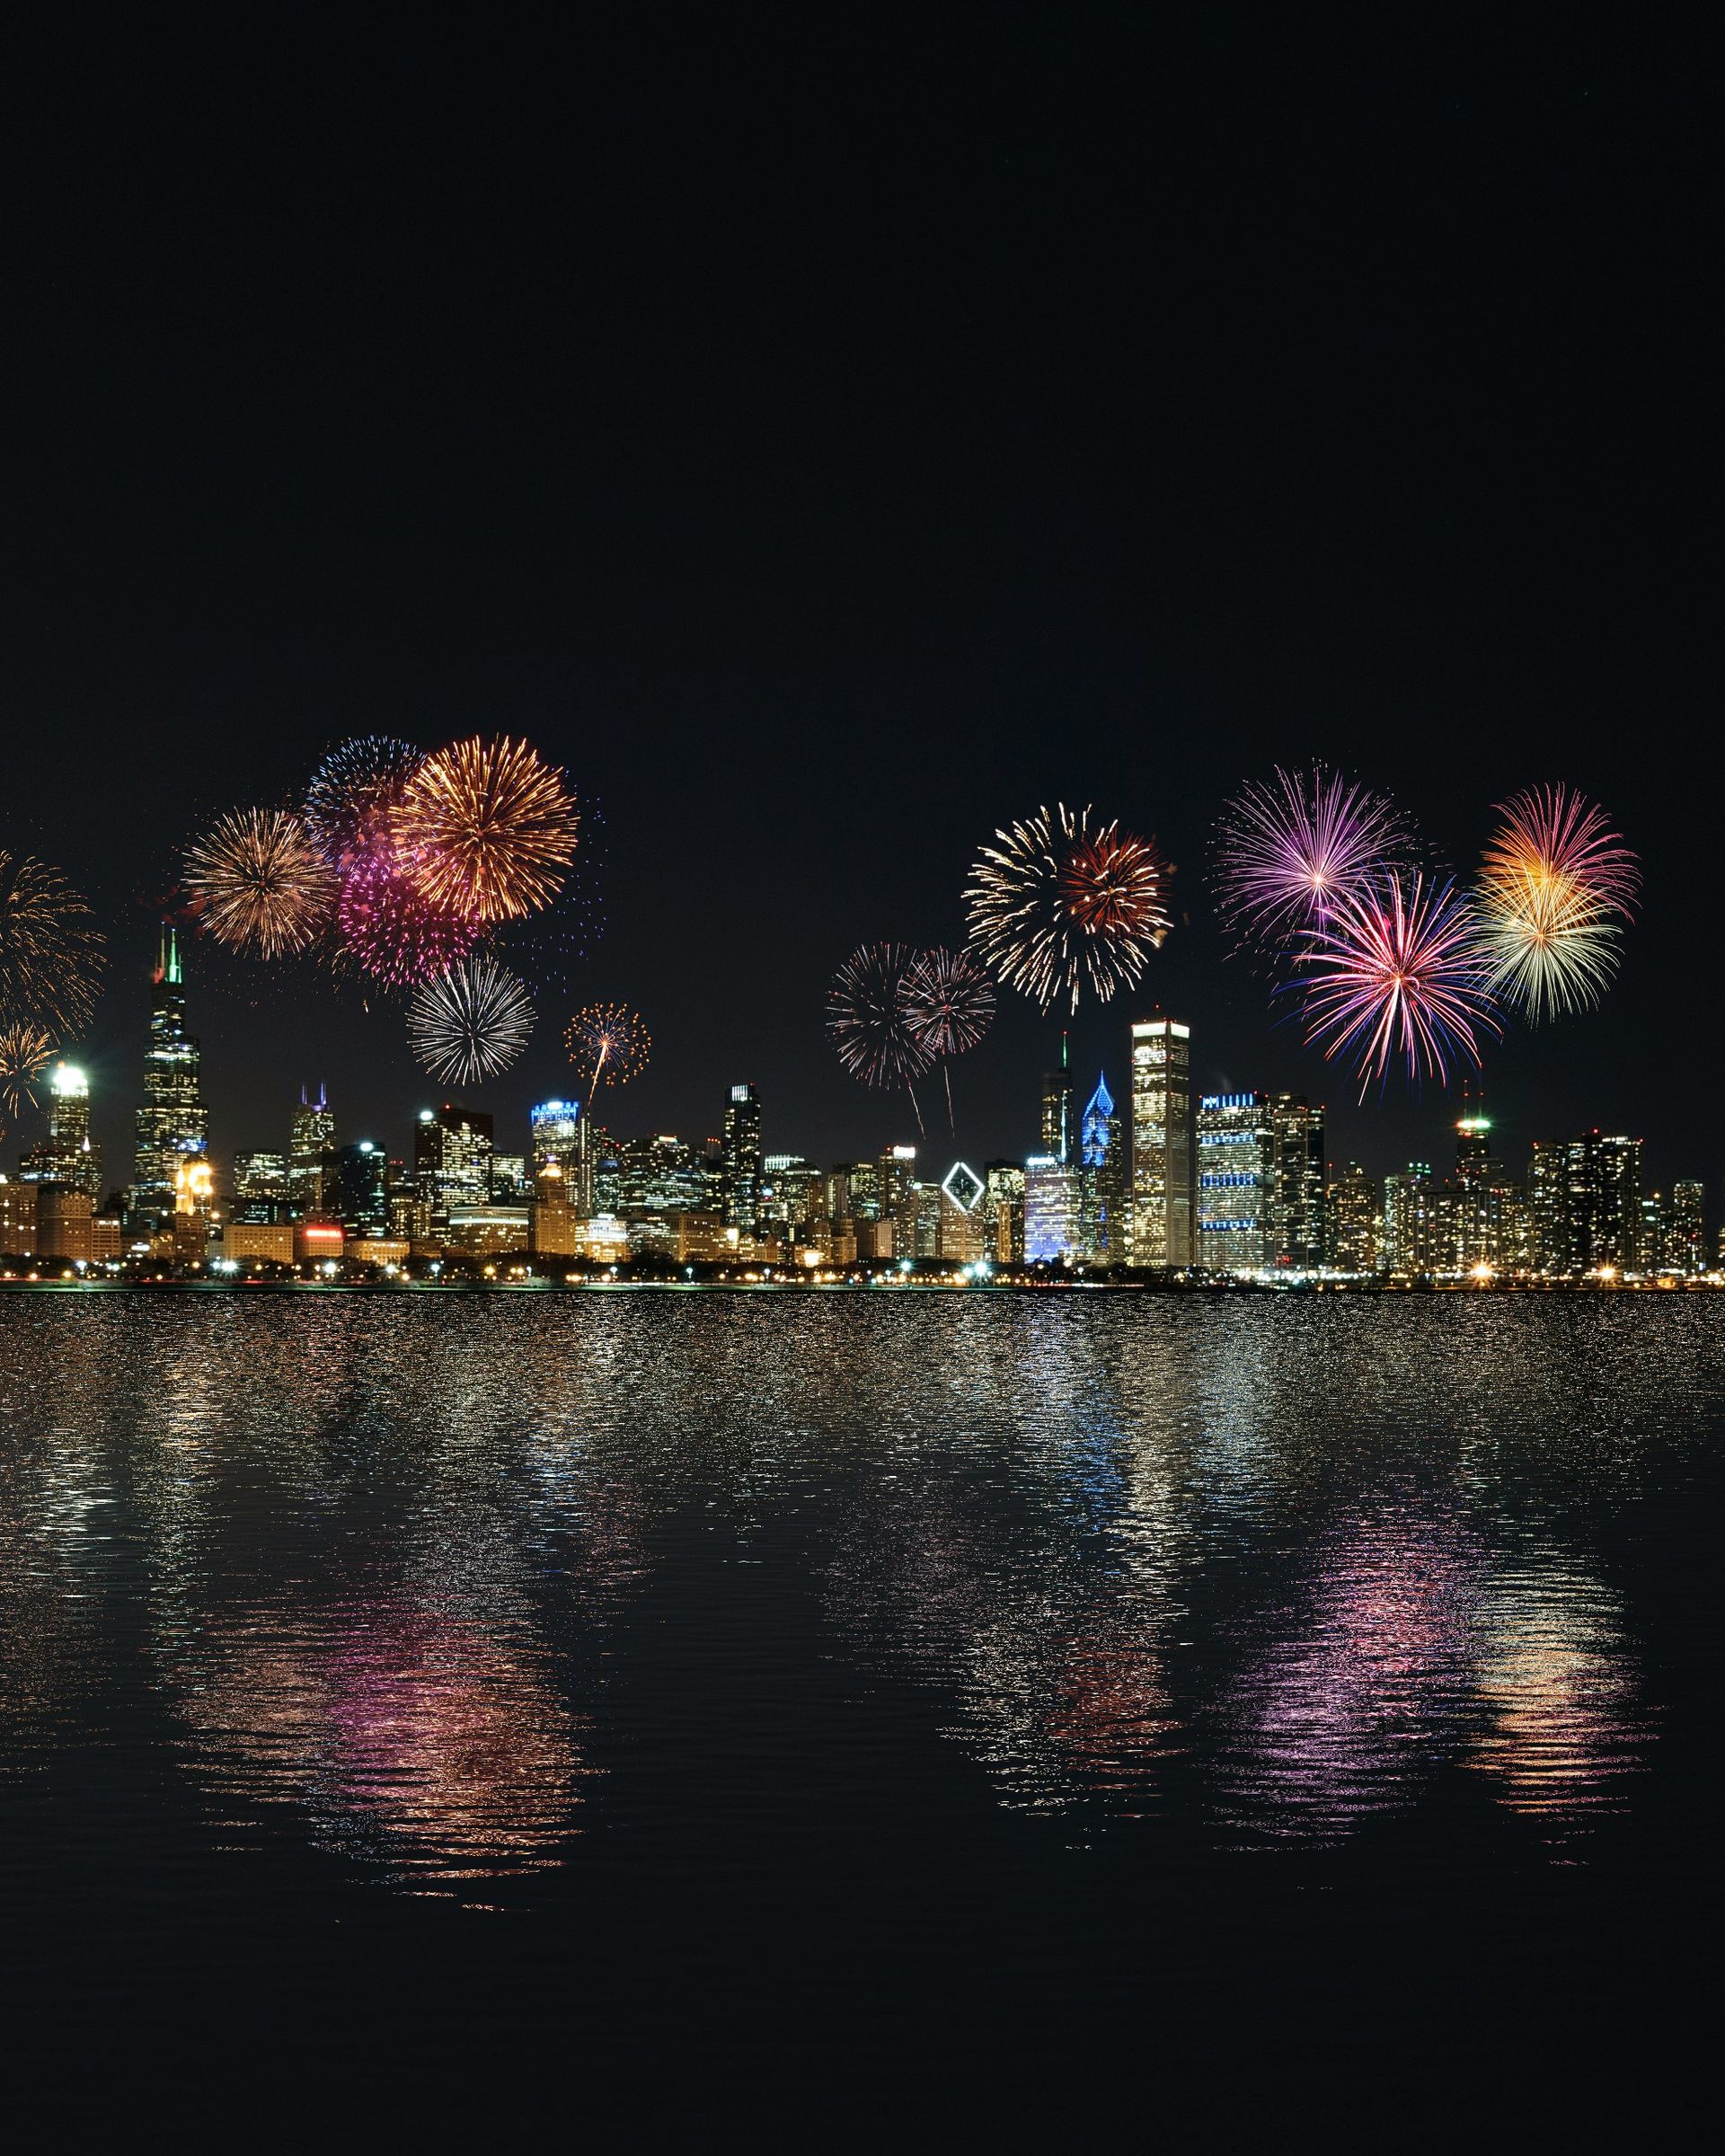 Fireworks are displayed over a city at night